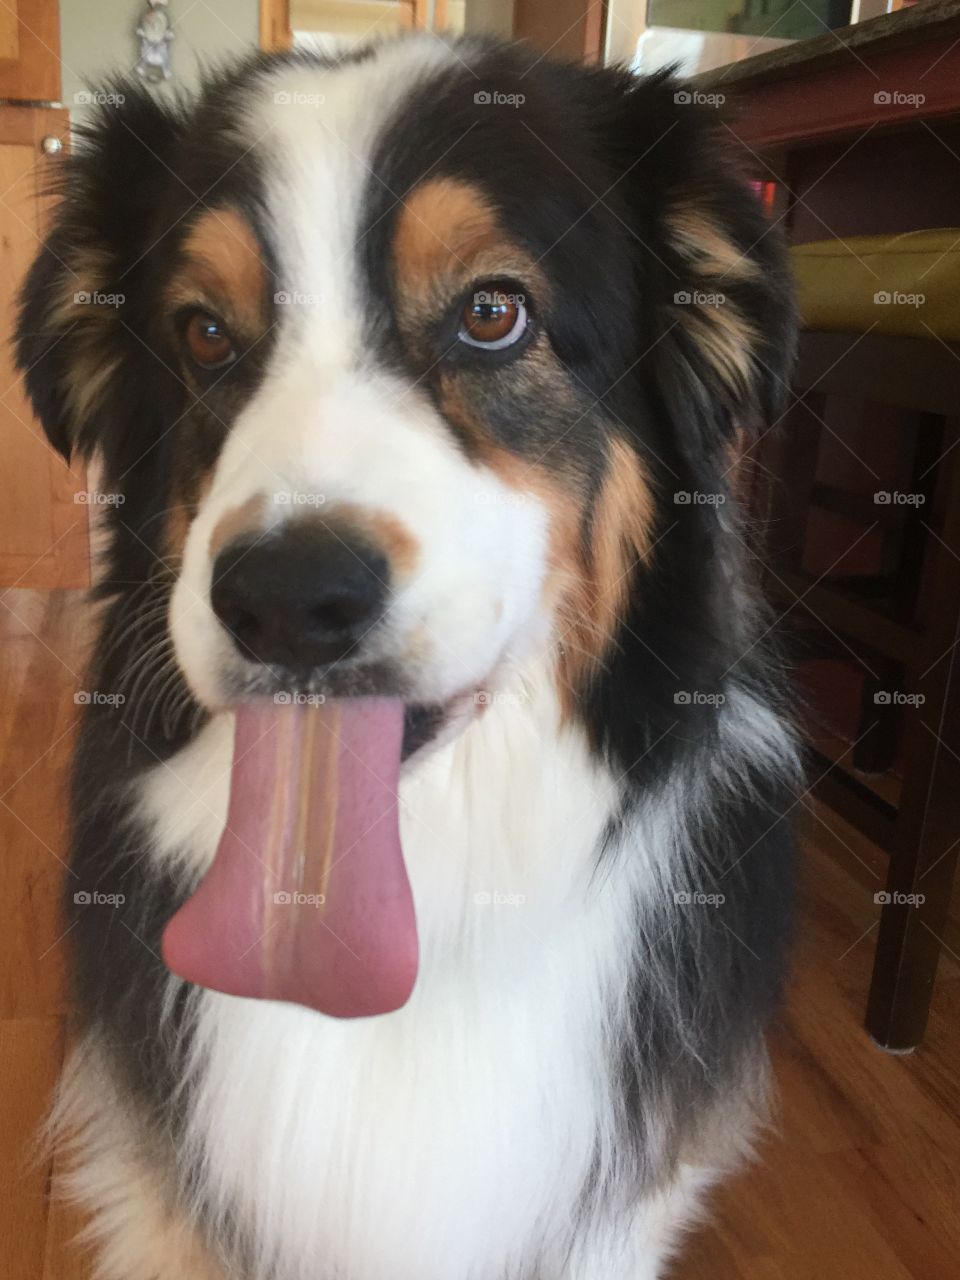 Excuse me, do I have any Peanut Butter on my Tongue?